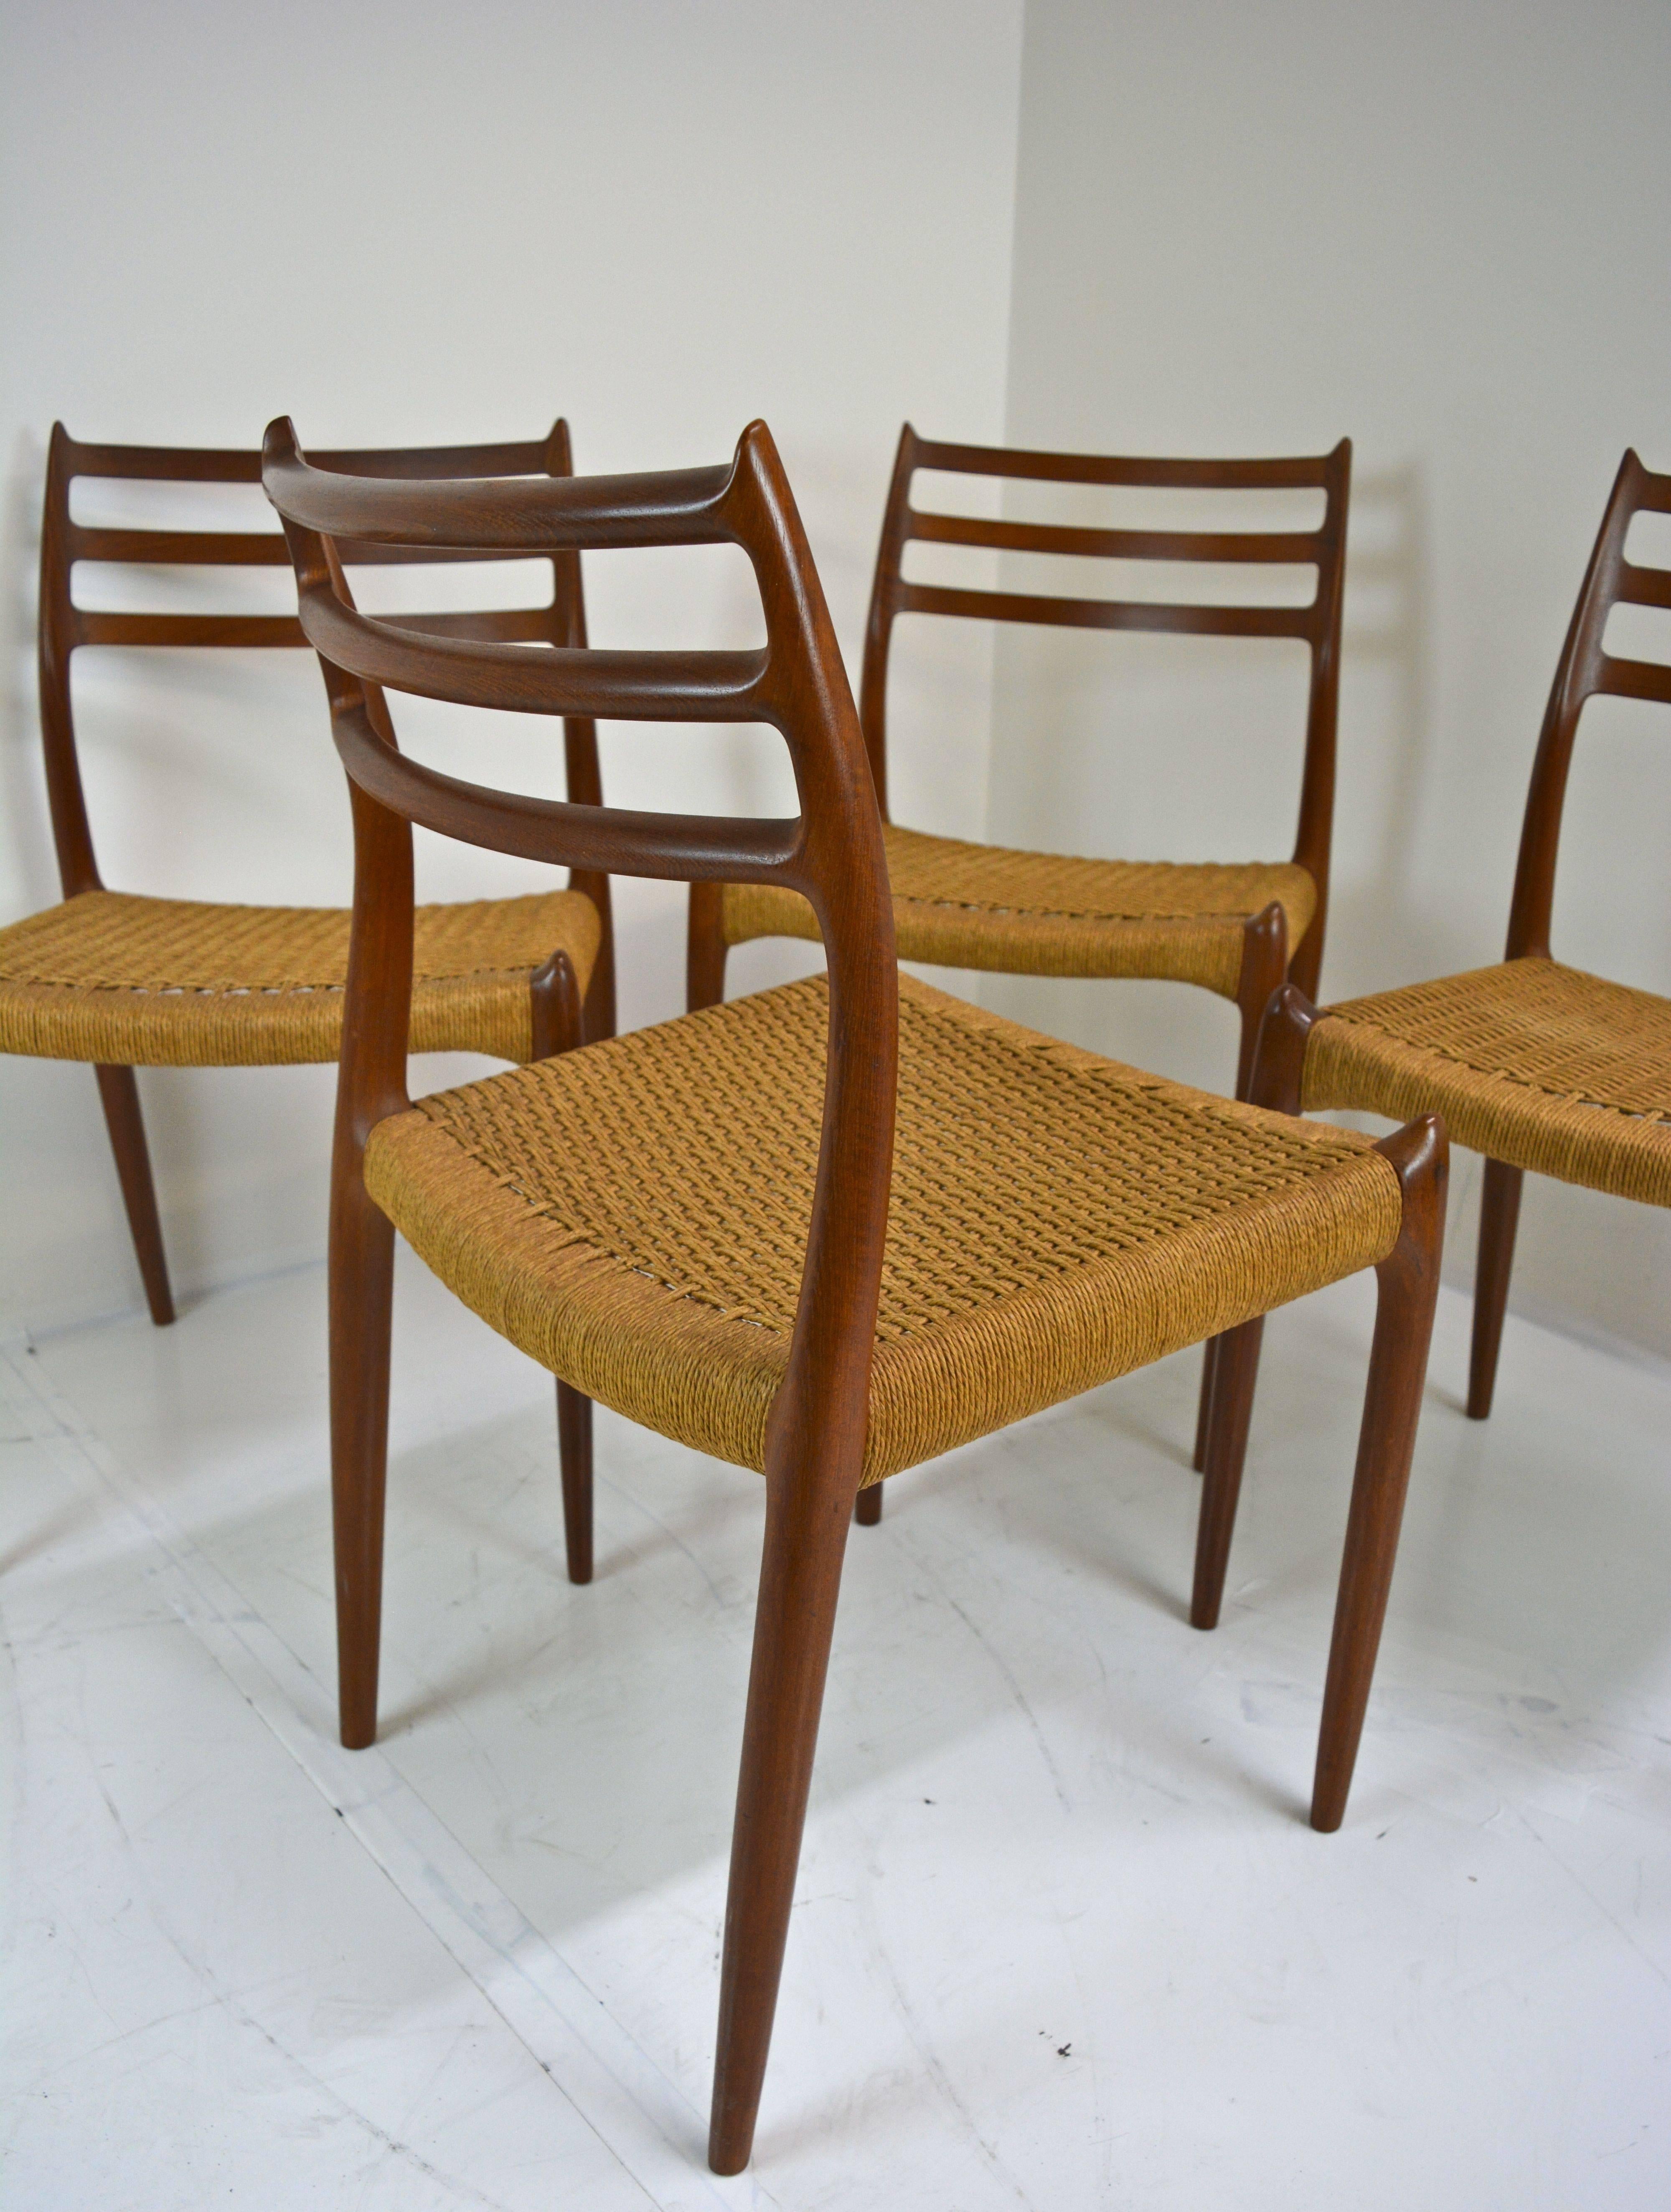 Set of four Danish teak dining chairs, model #78 by N Ø Møller for J L Møller. Excellent original condition. Even three of four original cord seats are perfect. Only one has any wear as shown in images where stress has severed a handful of the